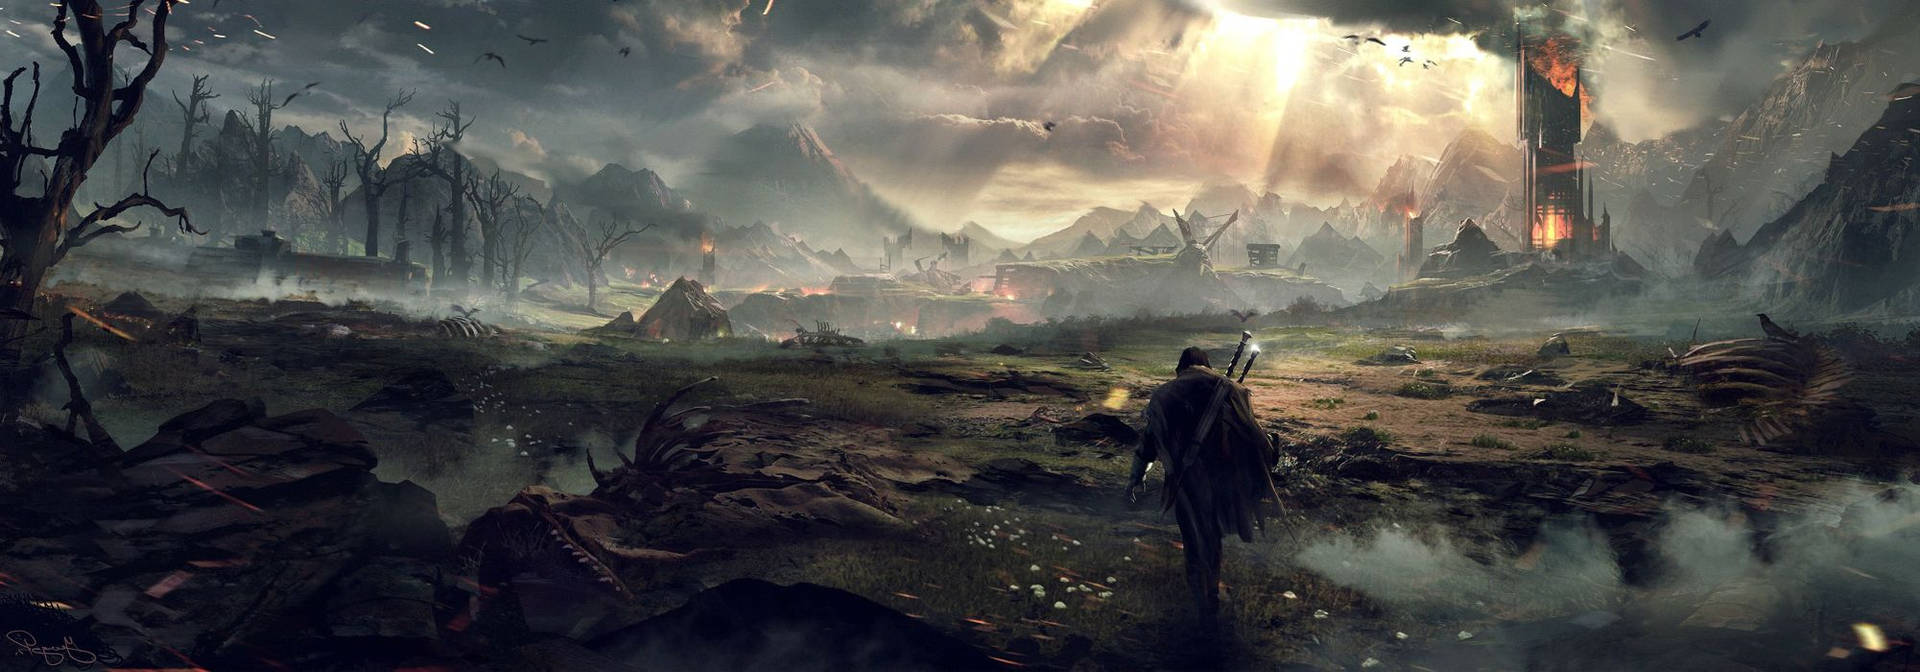 The Lord of the Rings Online HD Wallpapers and Backgrounds